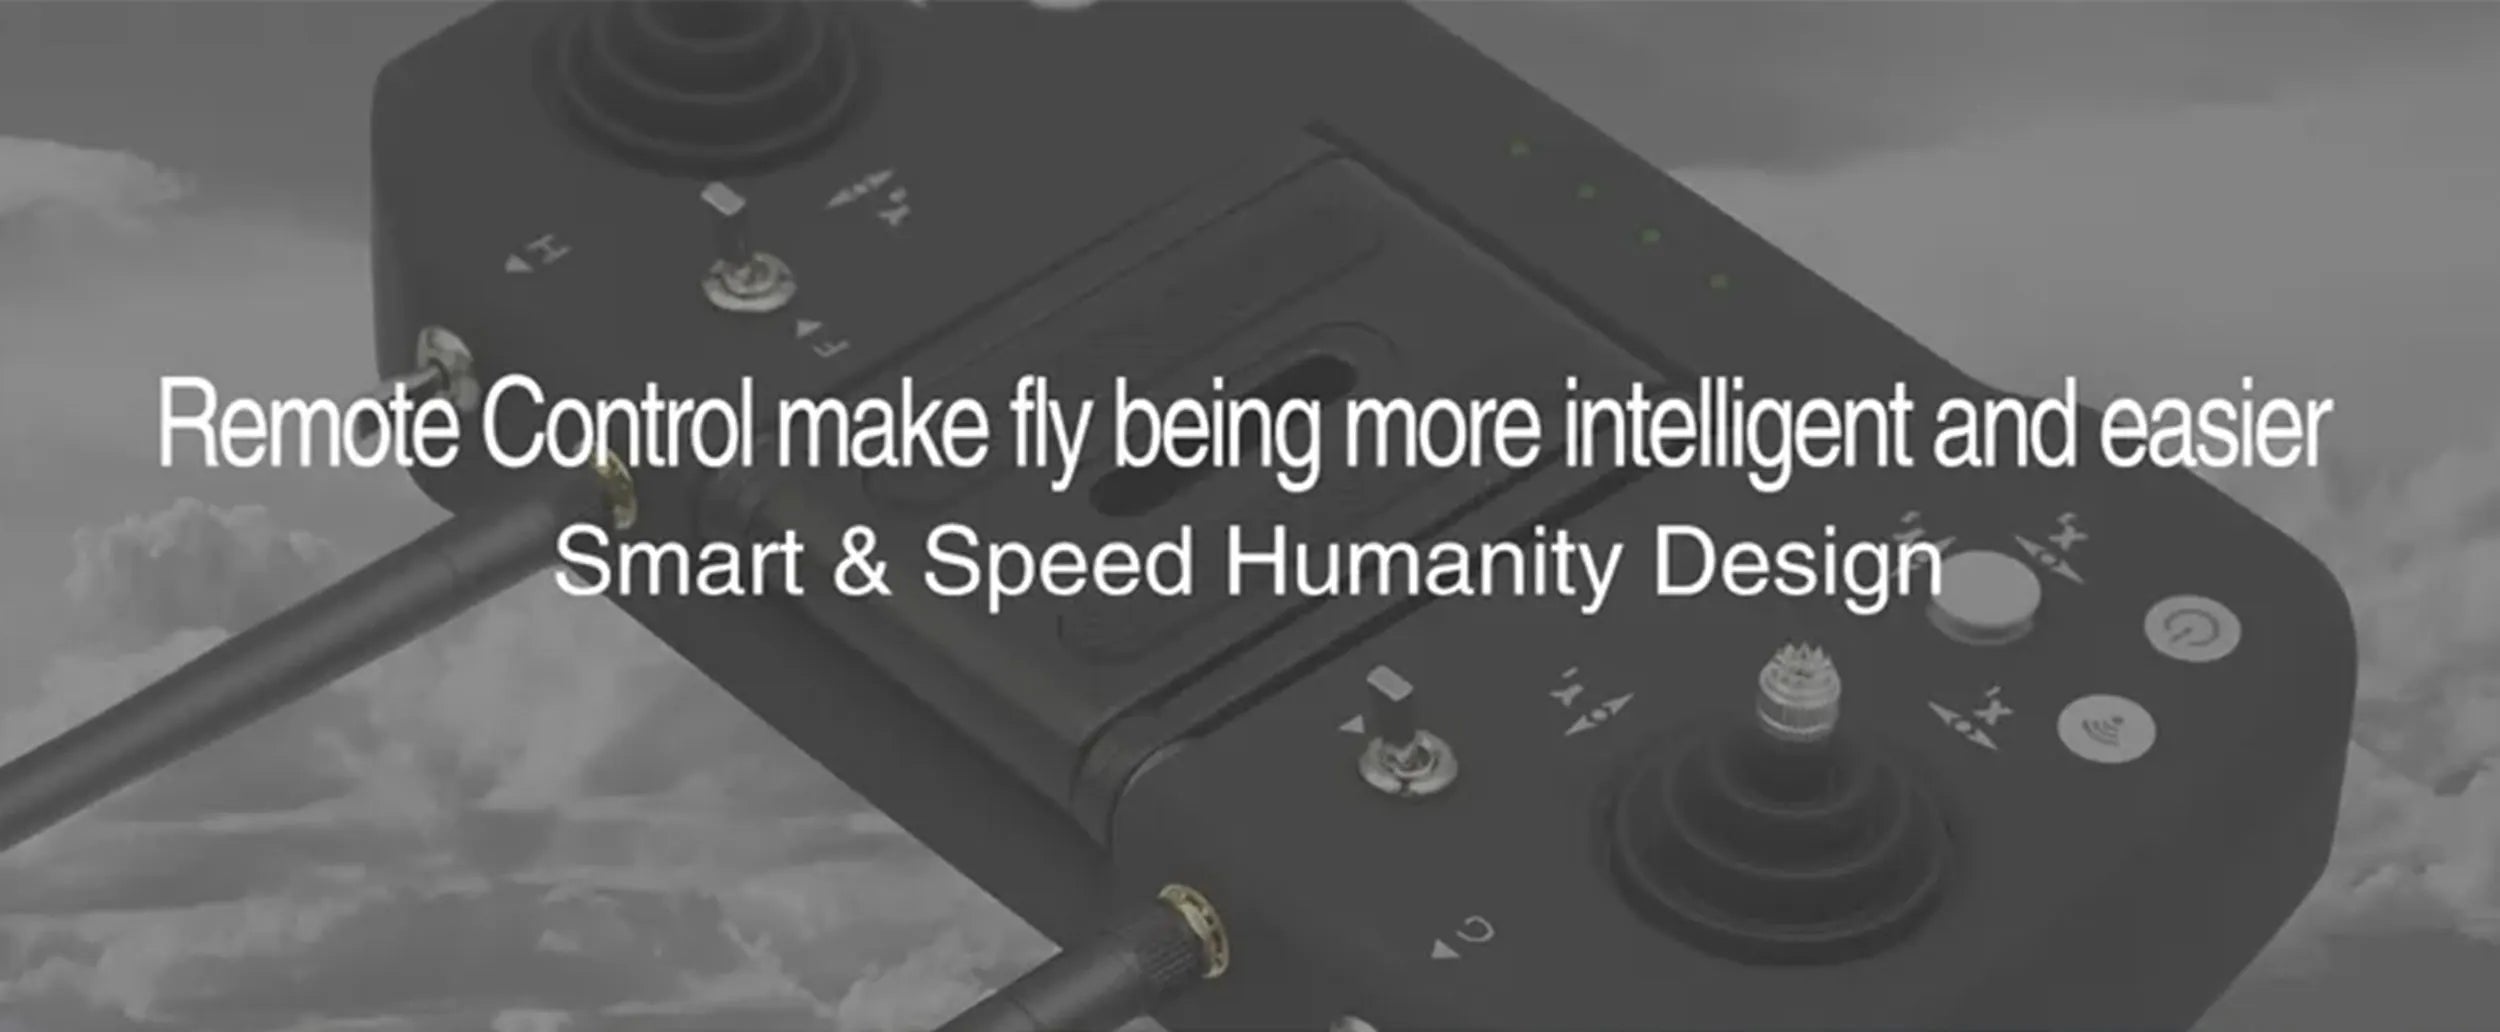 Skydroid M12L, Enhance flight control with smart design for ease of use and increased efficiency.